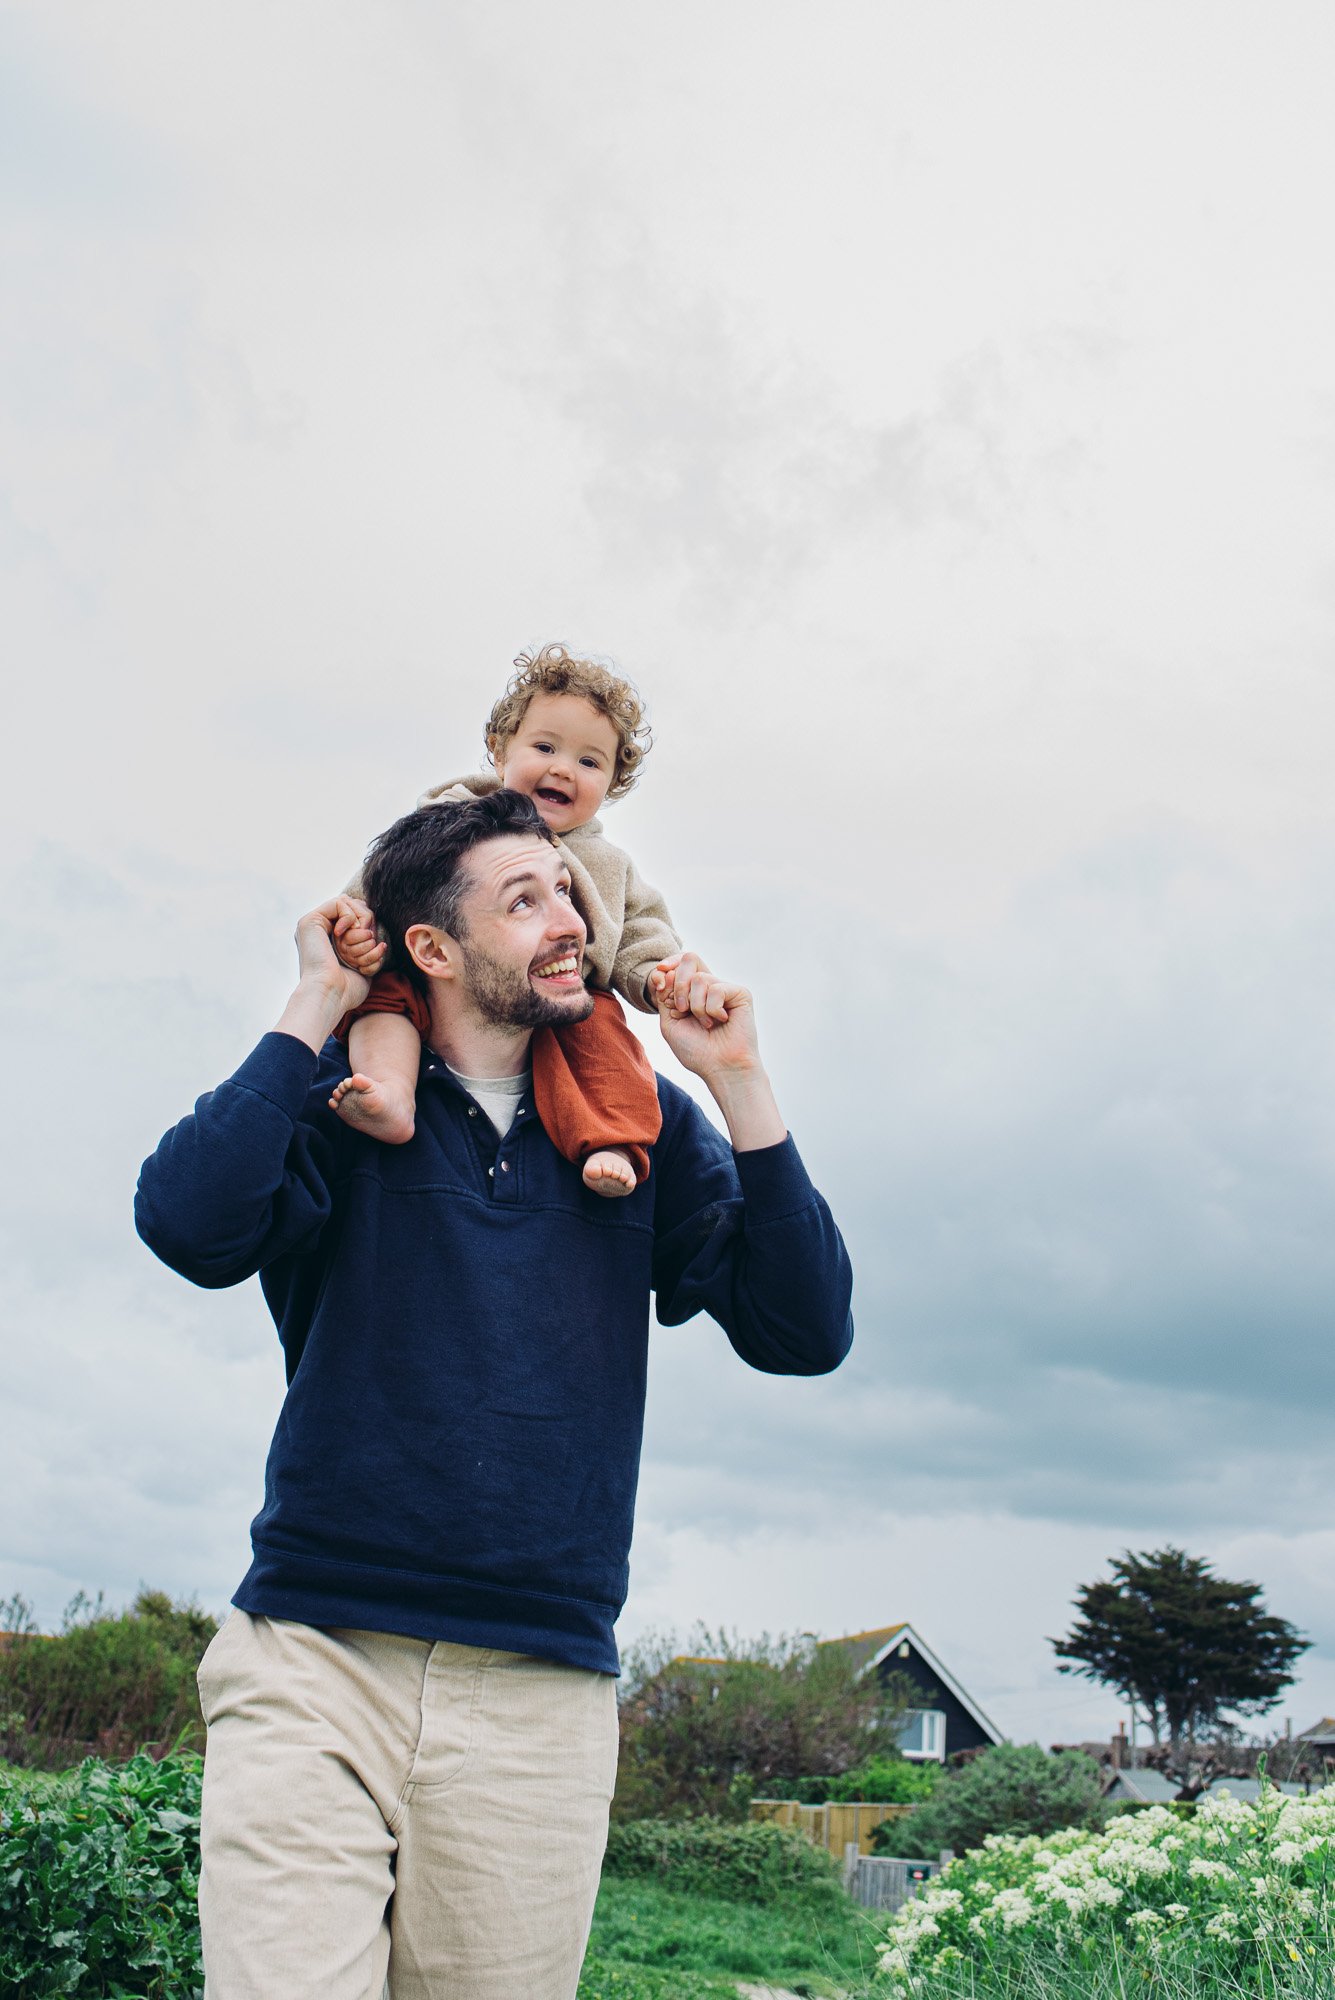 dad-little-girl-on-shoulders-documentary-family-photography-sussex-west-wittering-beach-photo-shoot.jpg